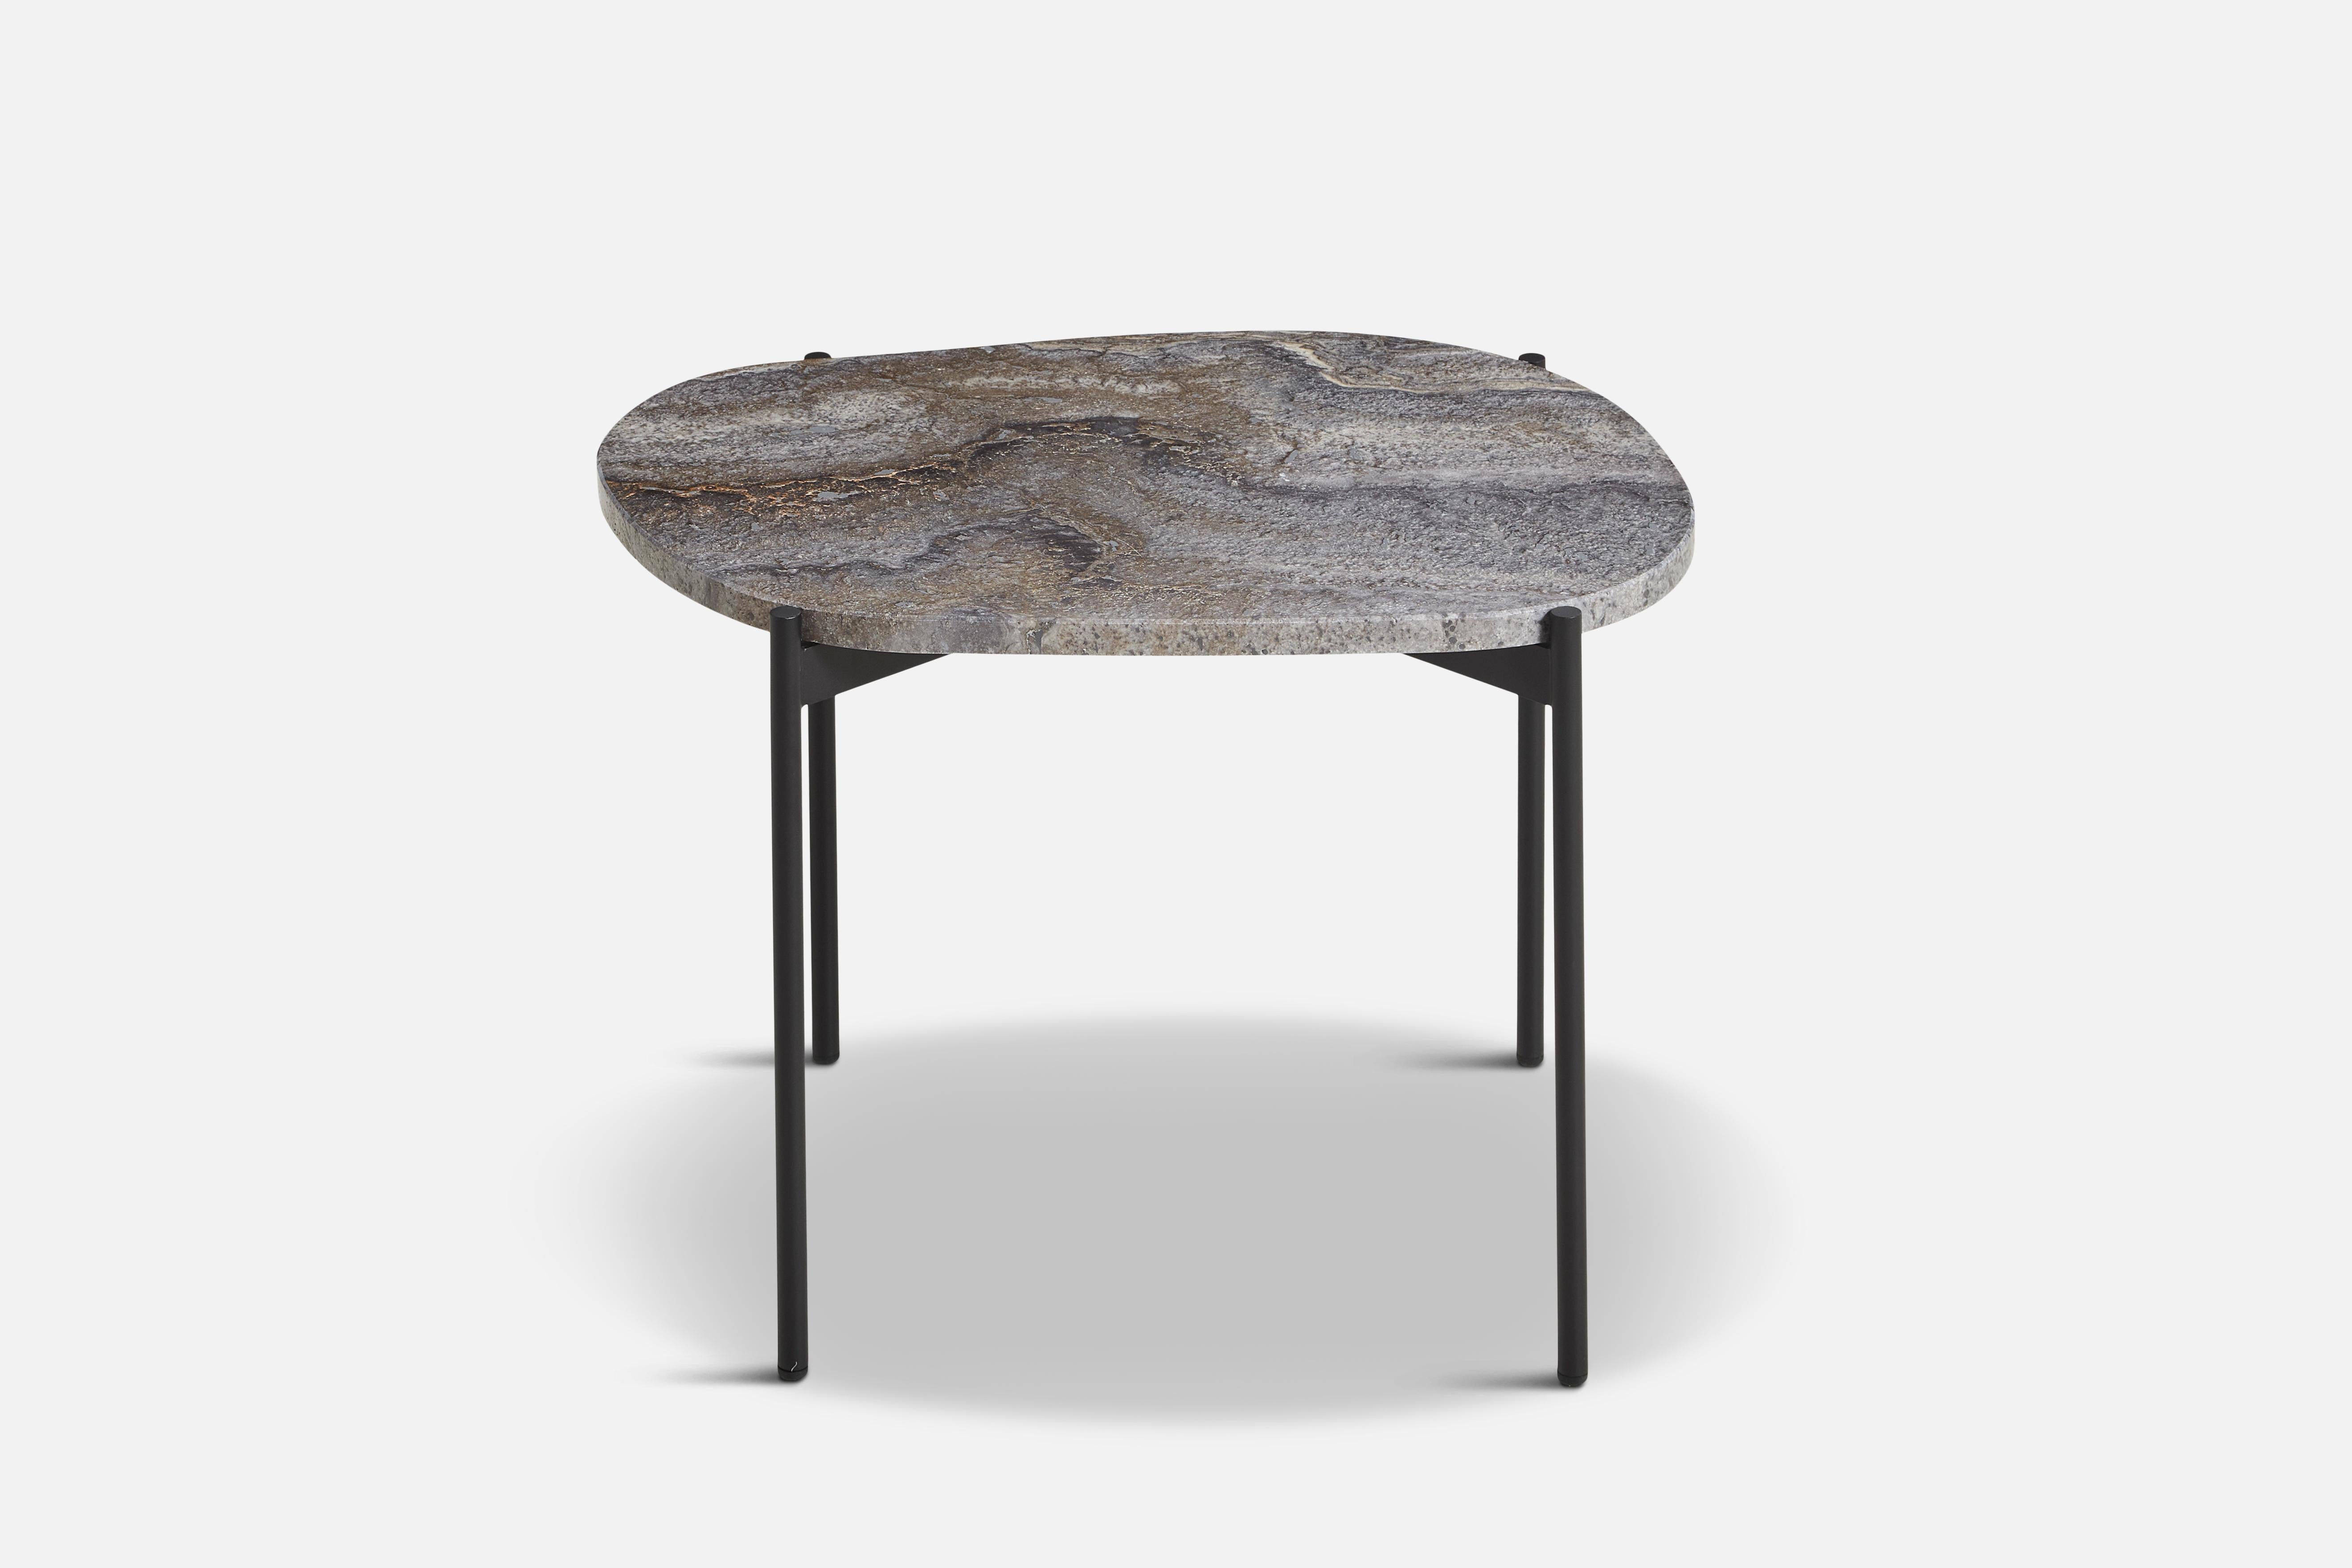 Grey Melange La Terra medium occasional table by Agnes Morguet
Materials: metal, grey melange travertine
Dimensions: D 40.5 x W 57.2 x H 41 cm

The founders, Mia and Torben Koed, decided to put their 30 years of experience into a new project. It